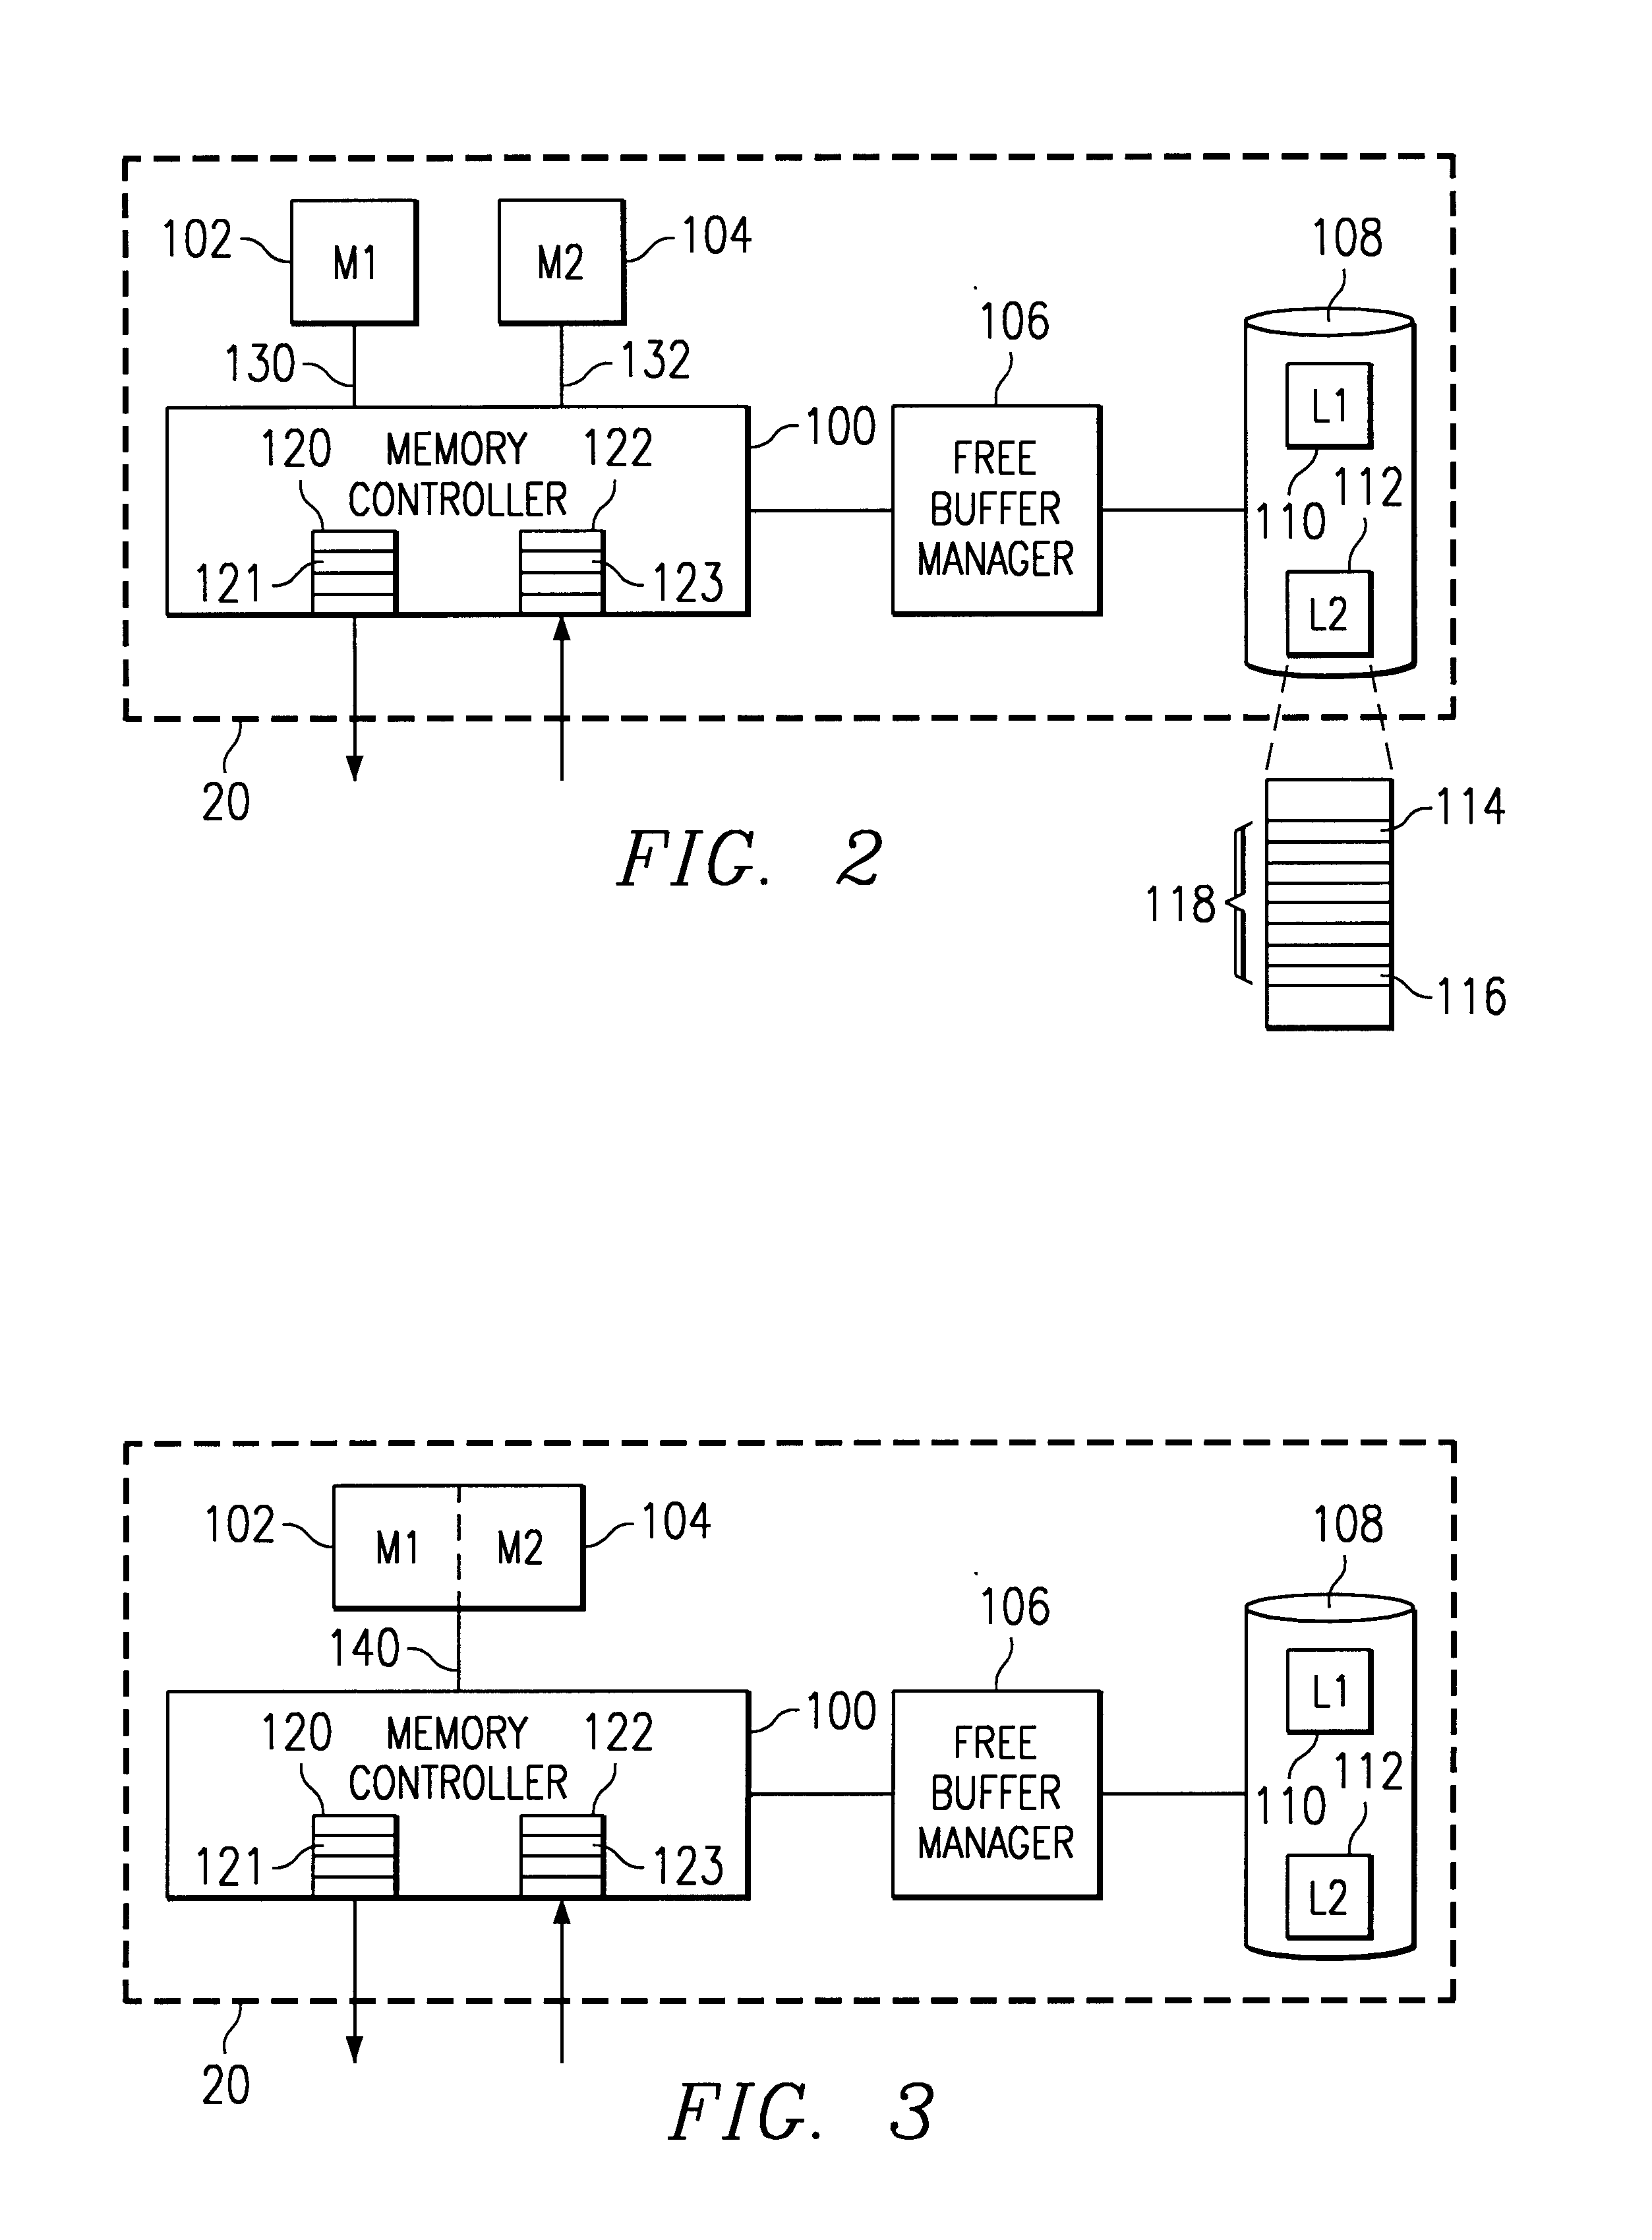 Interleaved read/write operation in a data switch